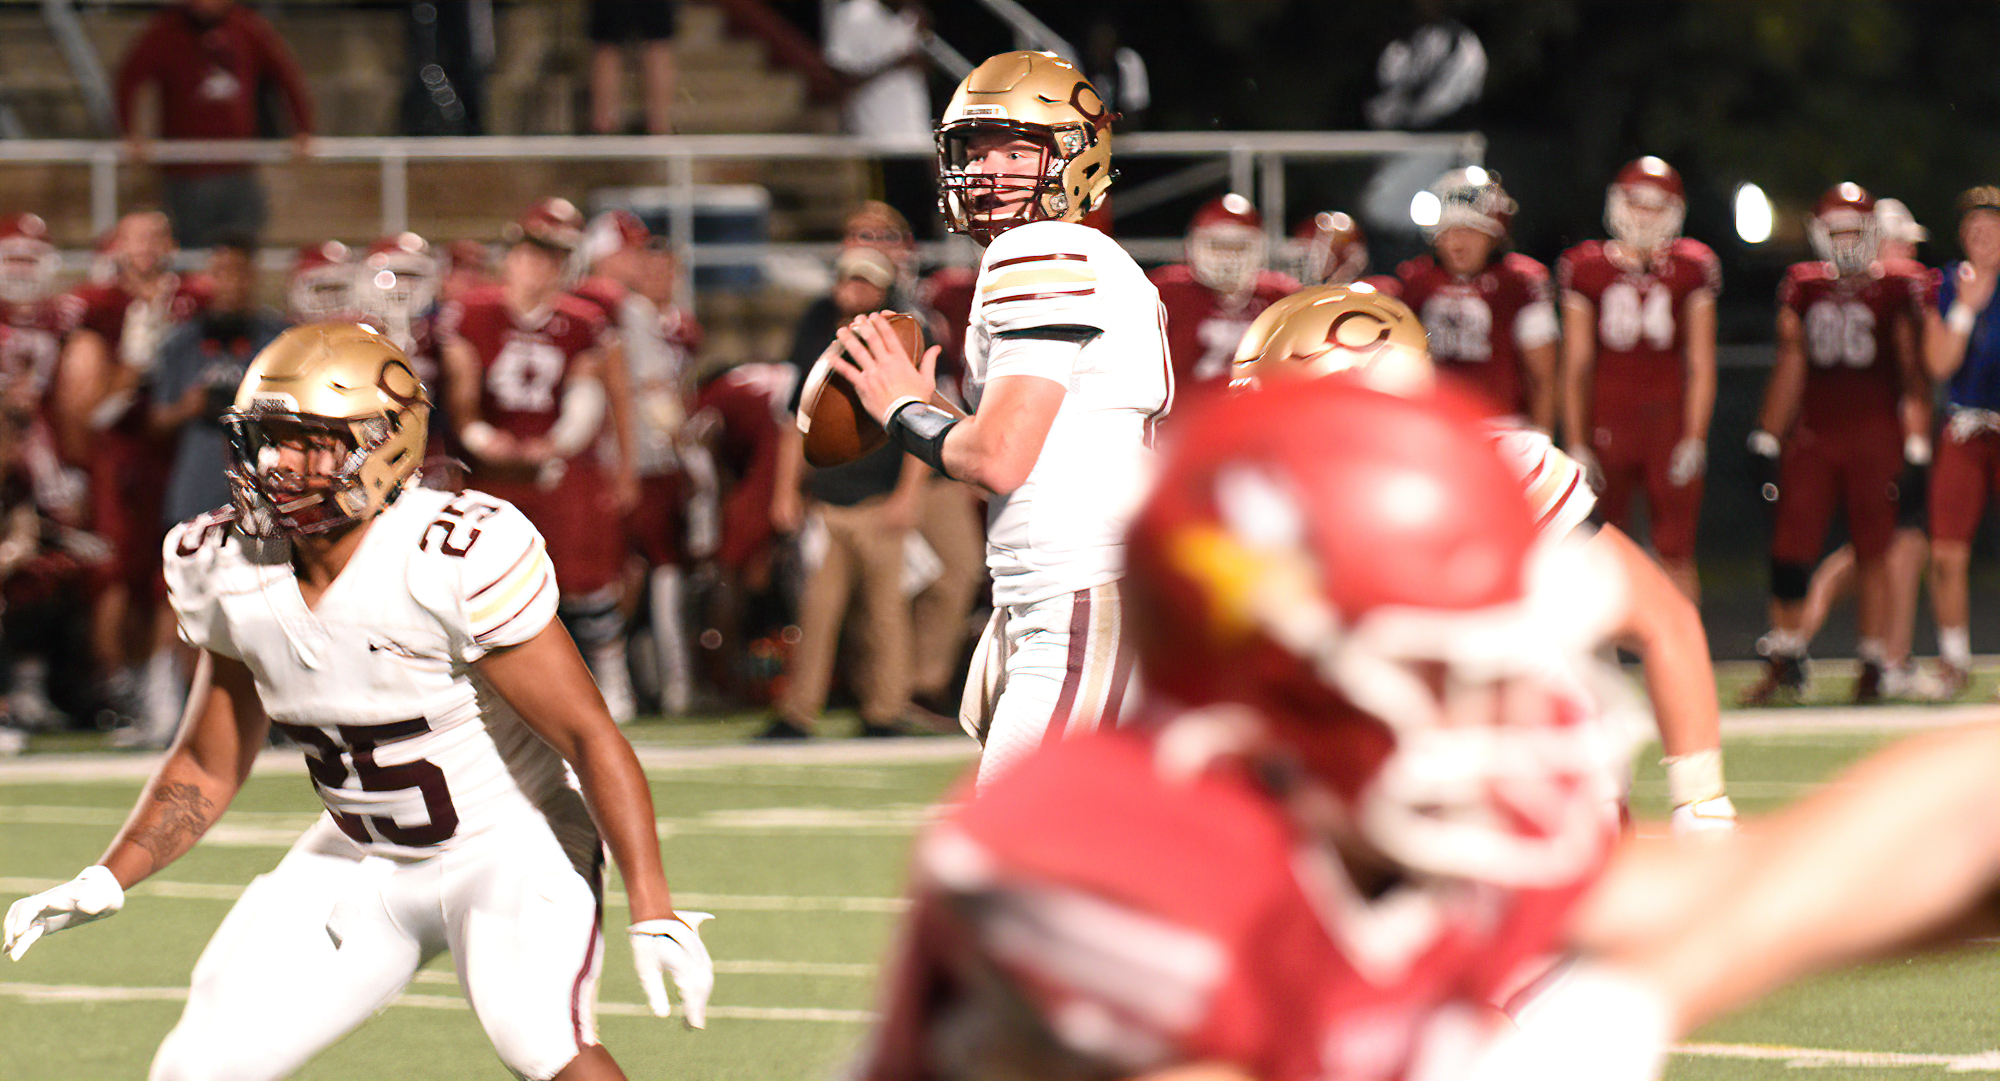 Sophomore quarterback Cooper Mattern threw for four touchdowns, and helped the Cobbers post a 42-13 win over Presentation in Aberdeen, S.D.